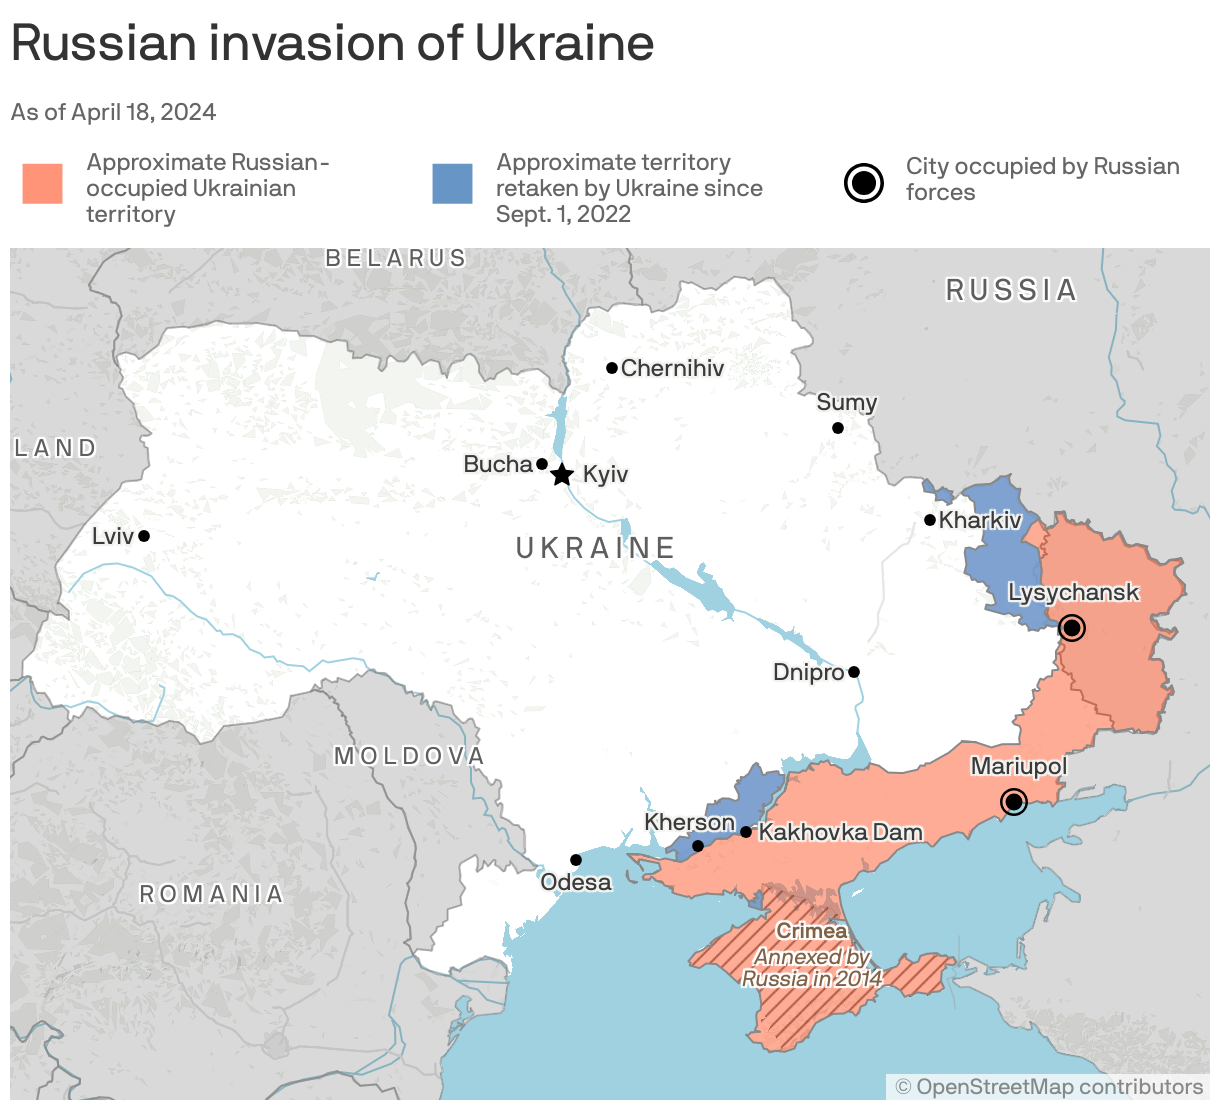 Russian invasion of Ukraine, as of March 21